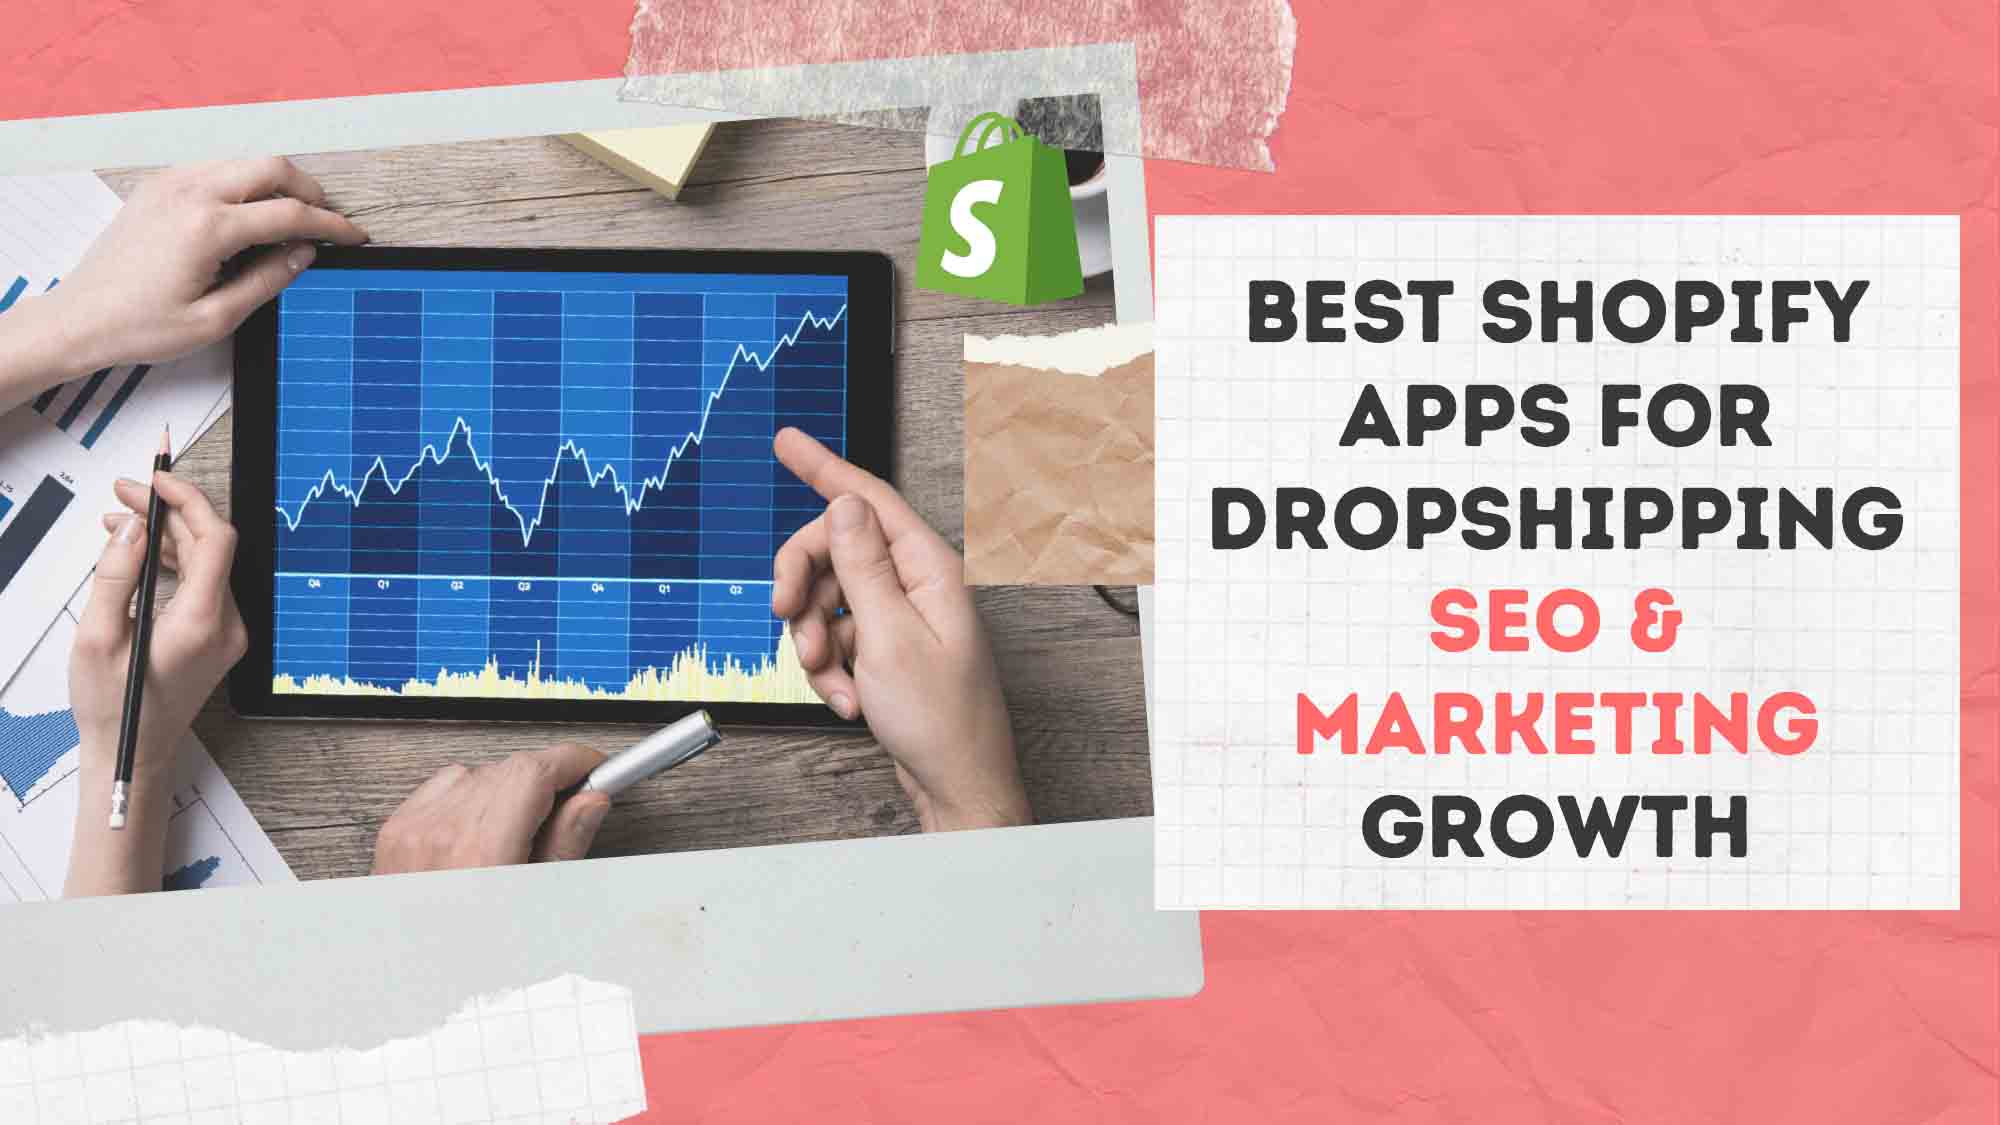 Best Shopify Apps For Dropshipping SEO & Marketing Growth!